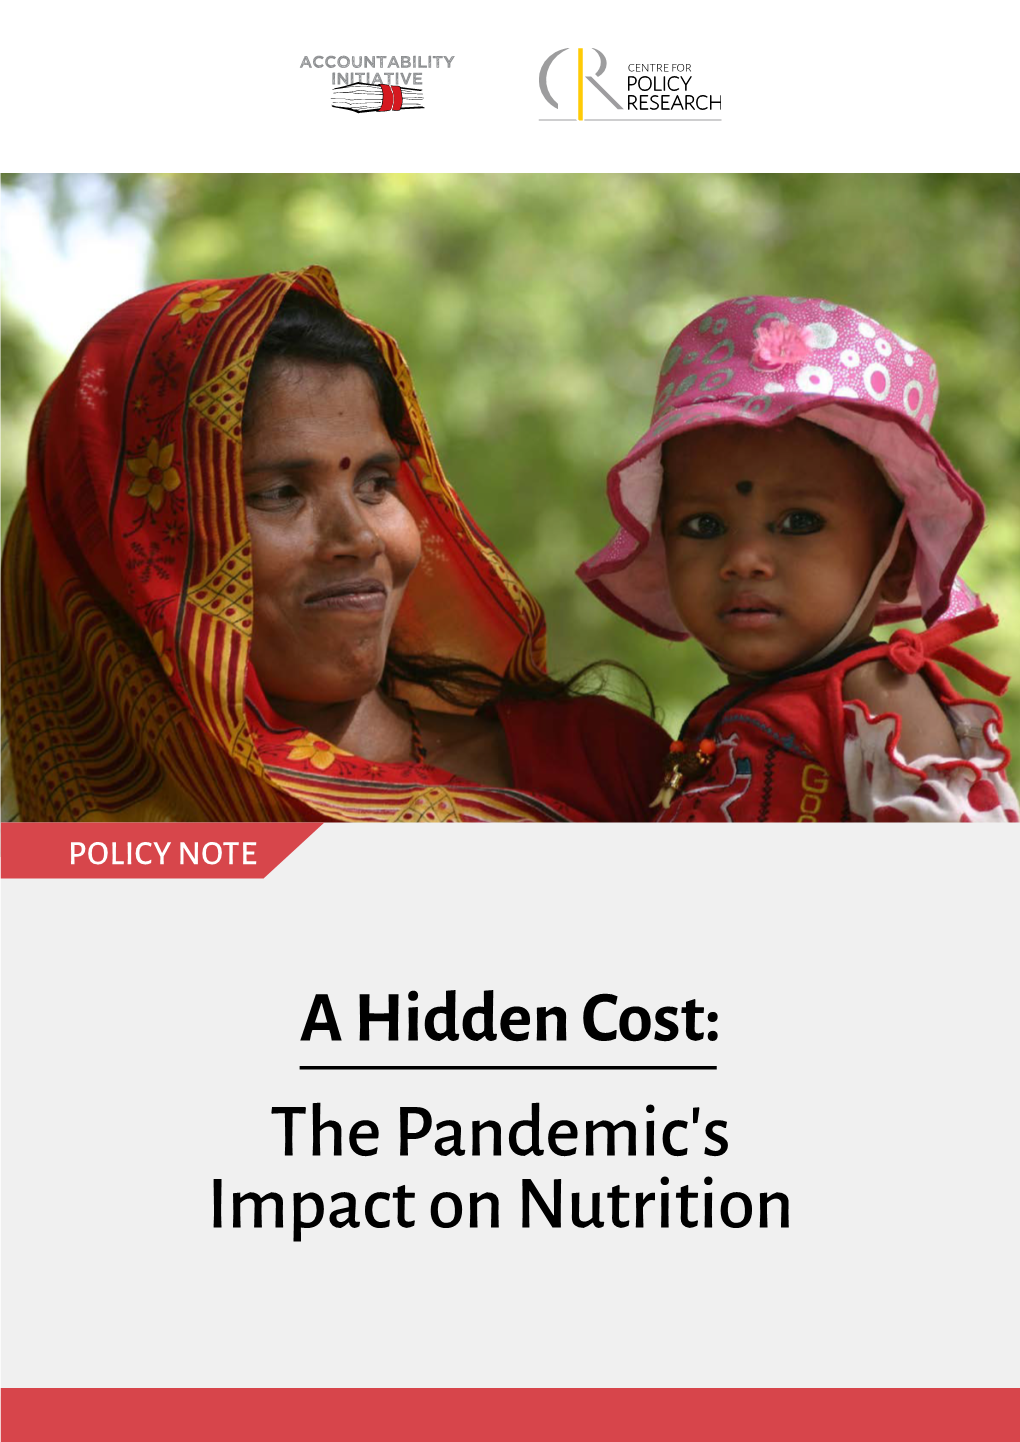 The Pandemic's Impact on Nutrition